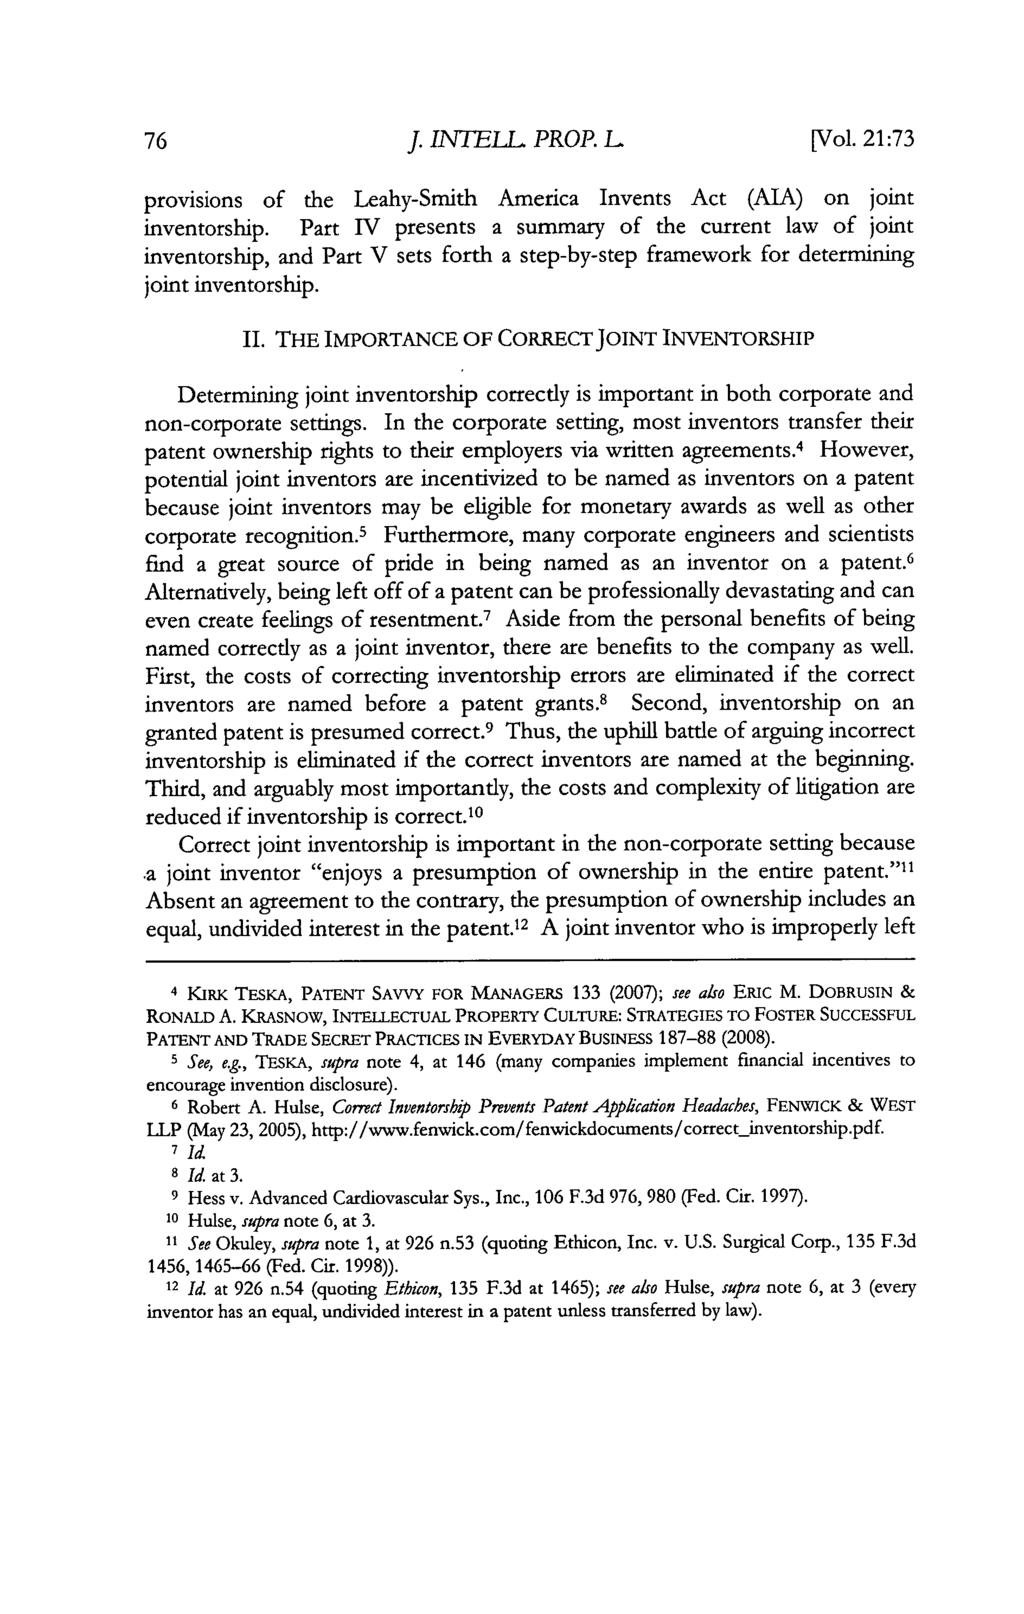 Journal of Intellectual Property Law, Vol. 21, Iss. 1 [2013], Art. 4 J. INTELL PROP. L [Vol. 21:73 provisions of the Leahy-Smith America Invents Act (AIA) on joint inventorship.